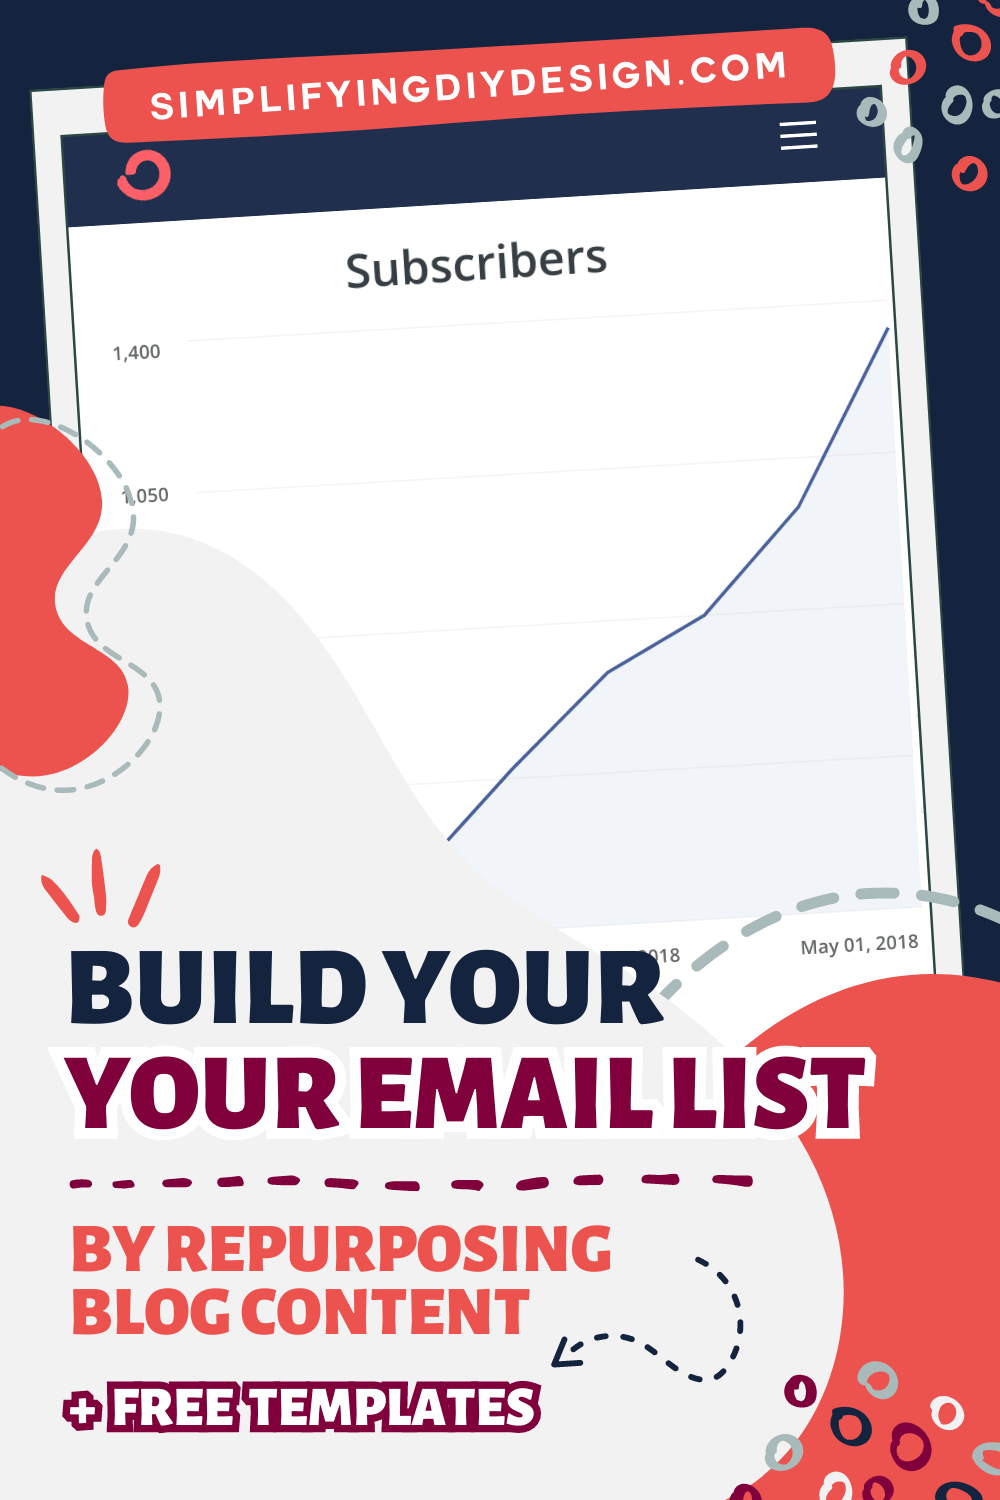 These list building tips will help you skyrocket your email list using content you already have! Learn to repurpose blog content that'll grow your email list fast!